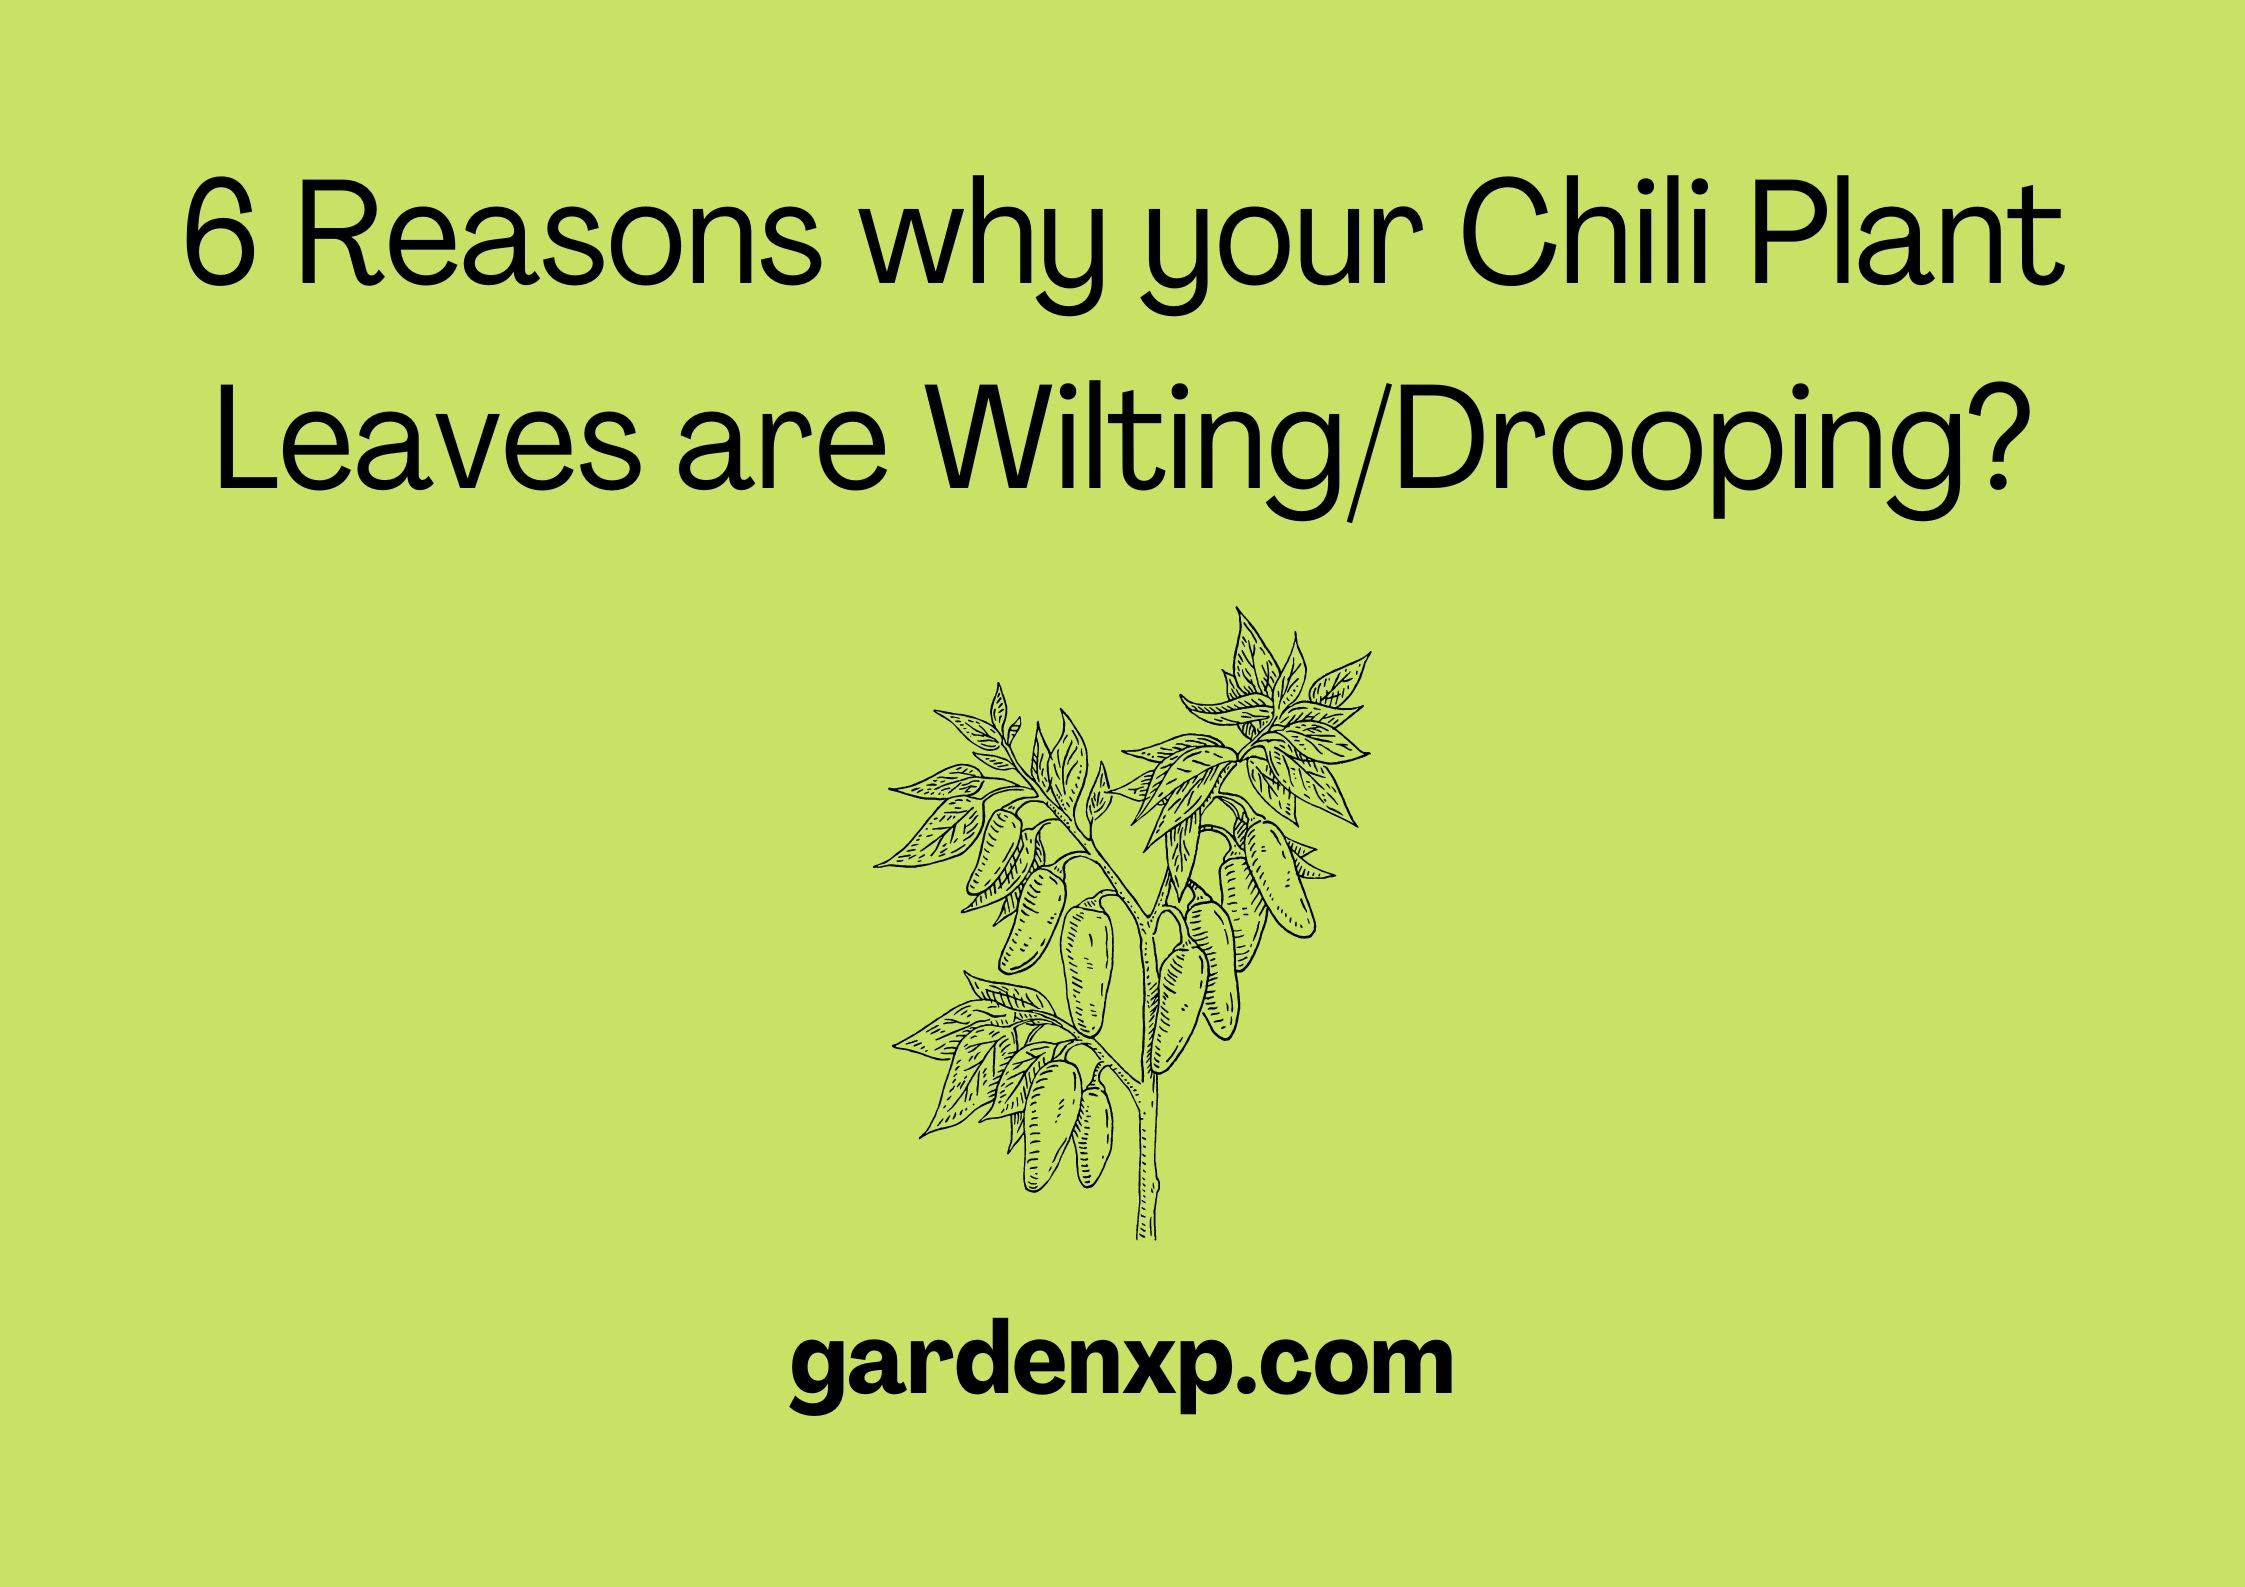 6 Reasons why your Chili Plant Leaves are Wilting/Drooping?